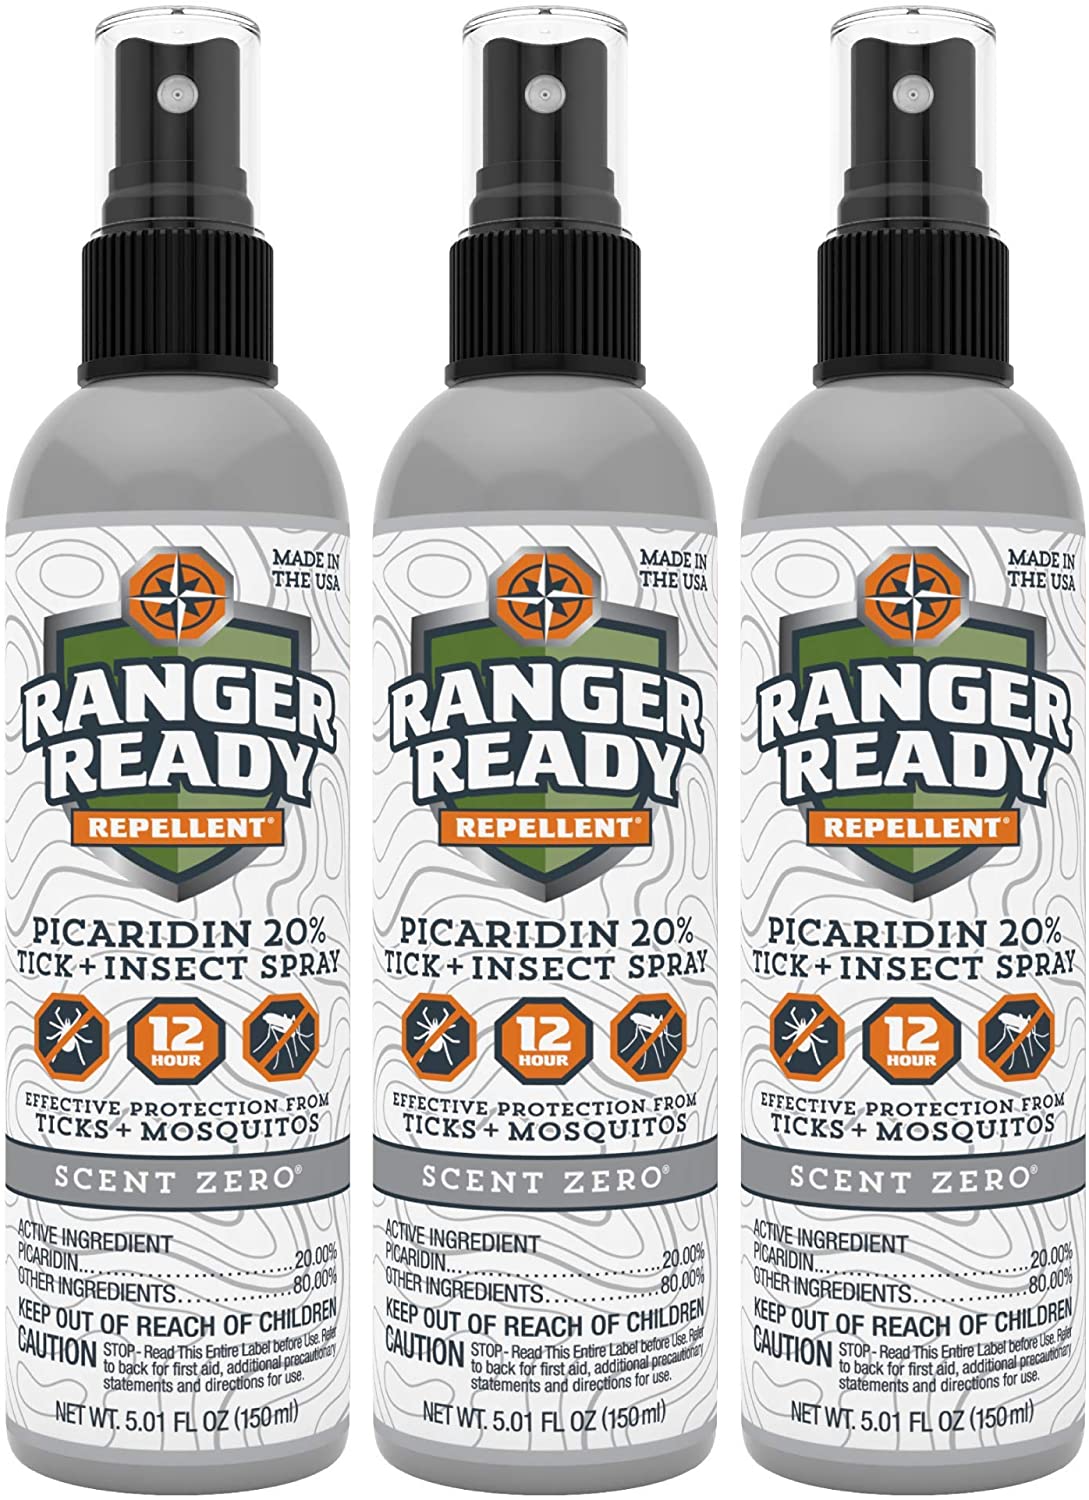 Ranger Ready picaridin insect repellent